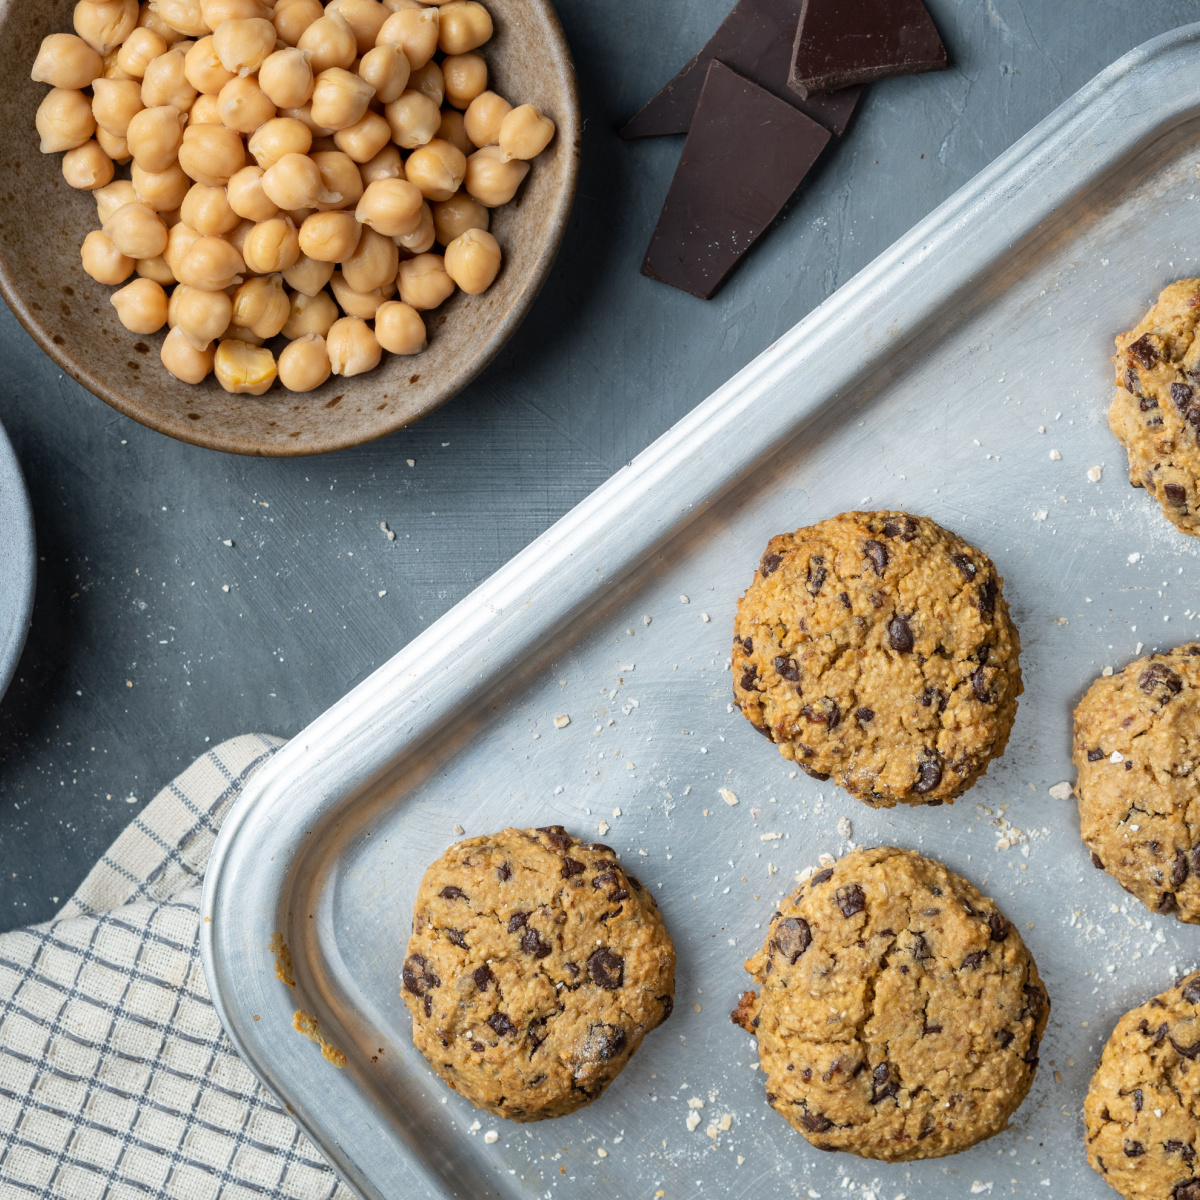 Enjoy the Perfect Cookie — at Home, Food & Nutrition